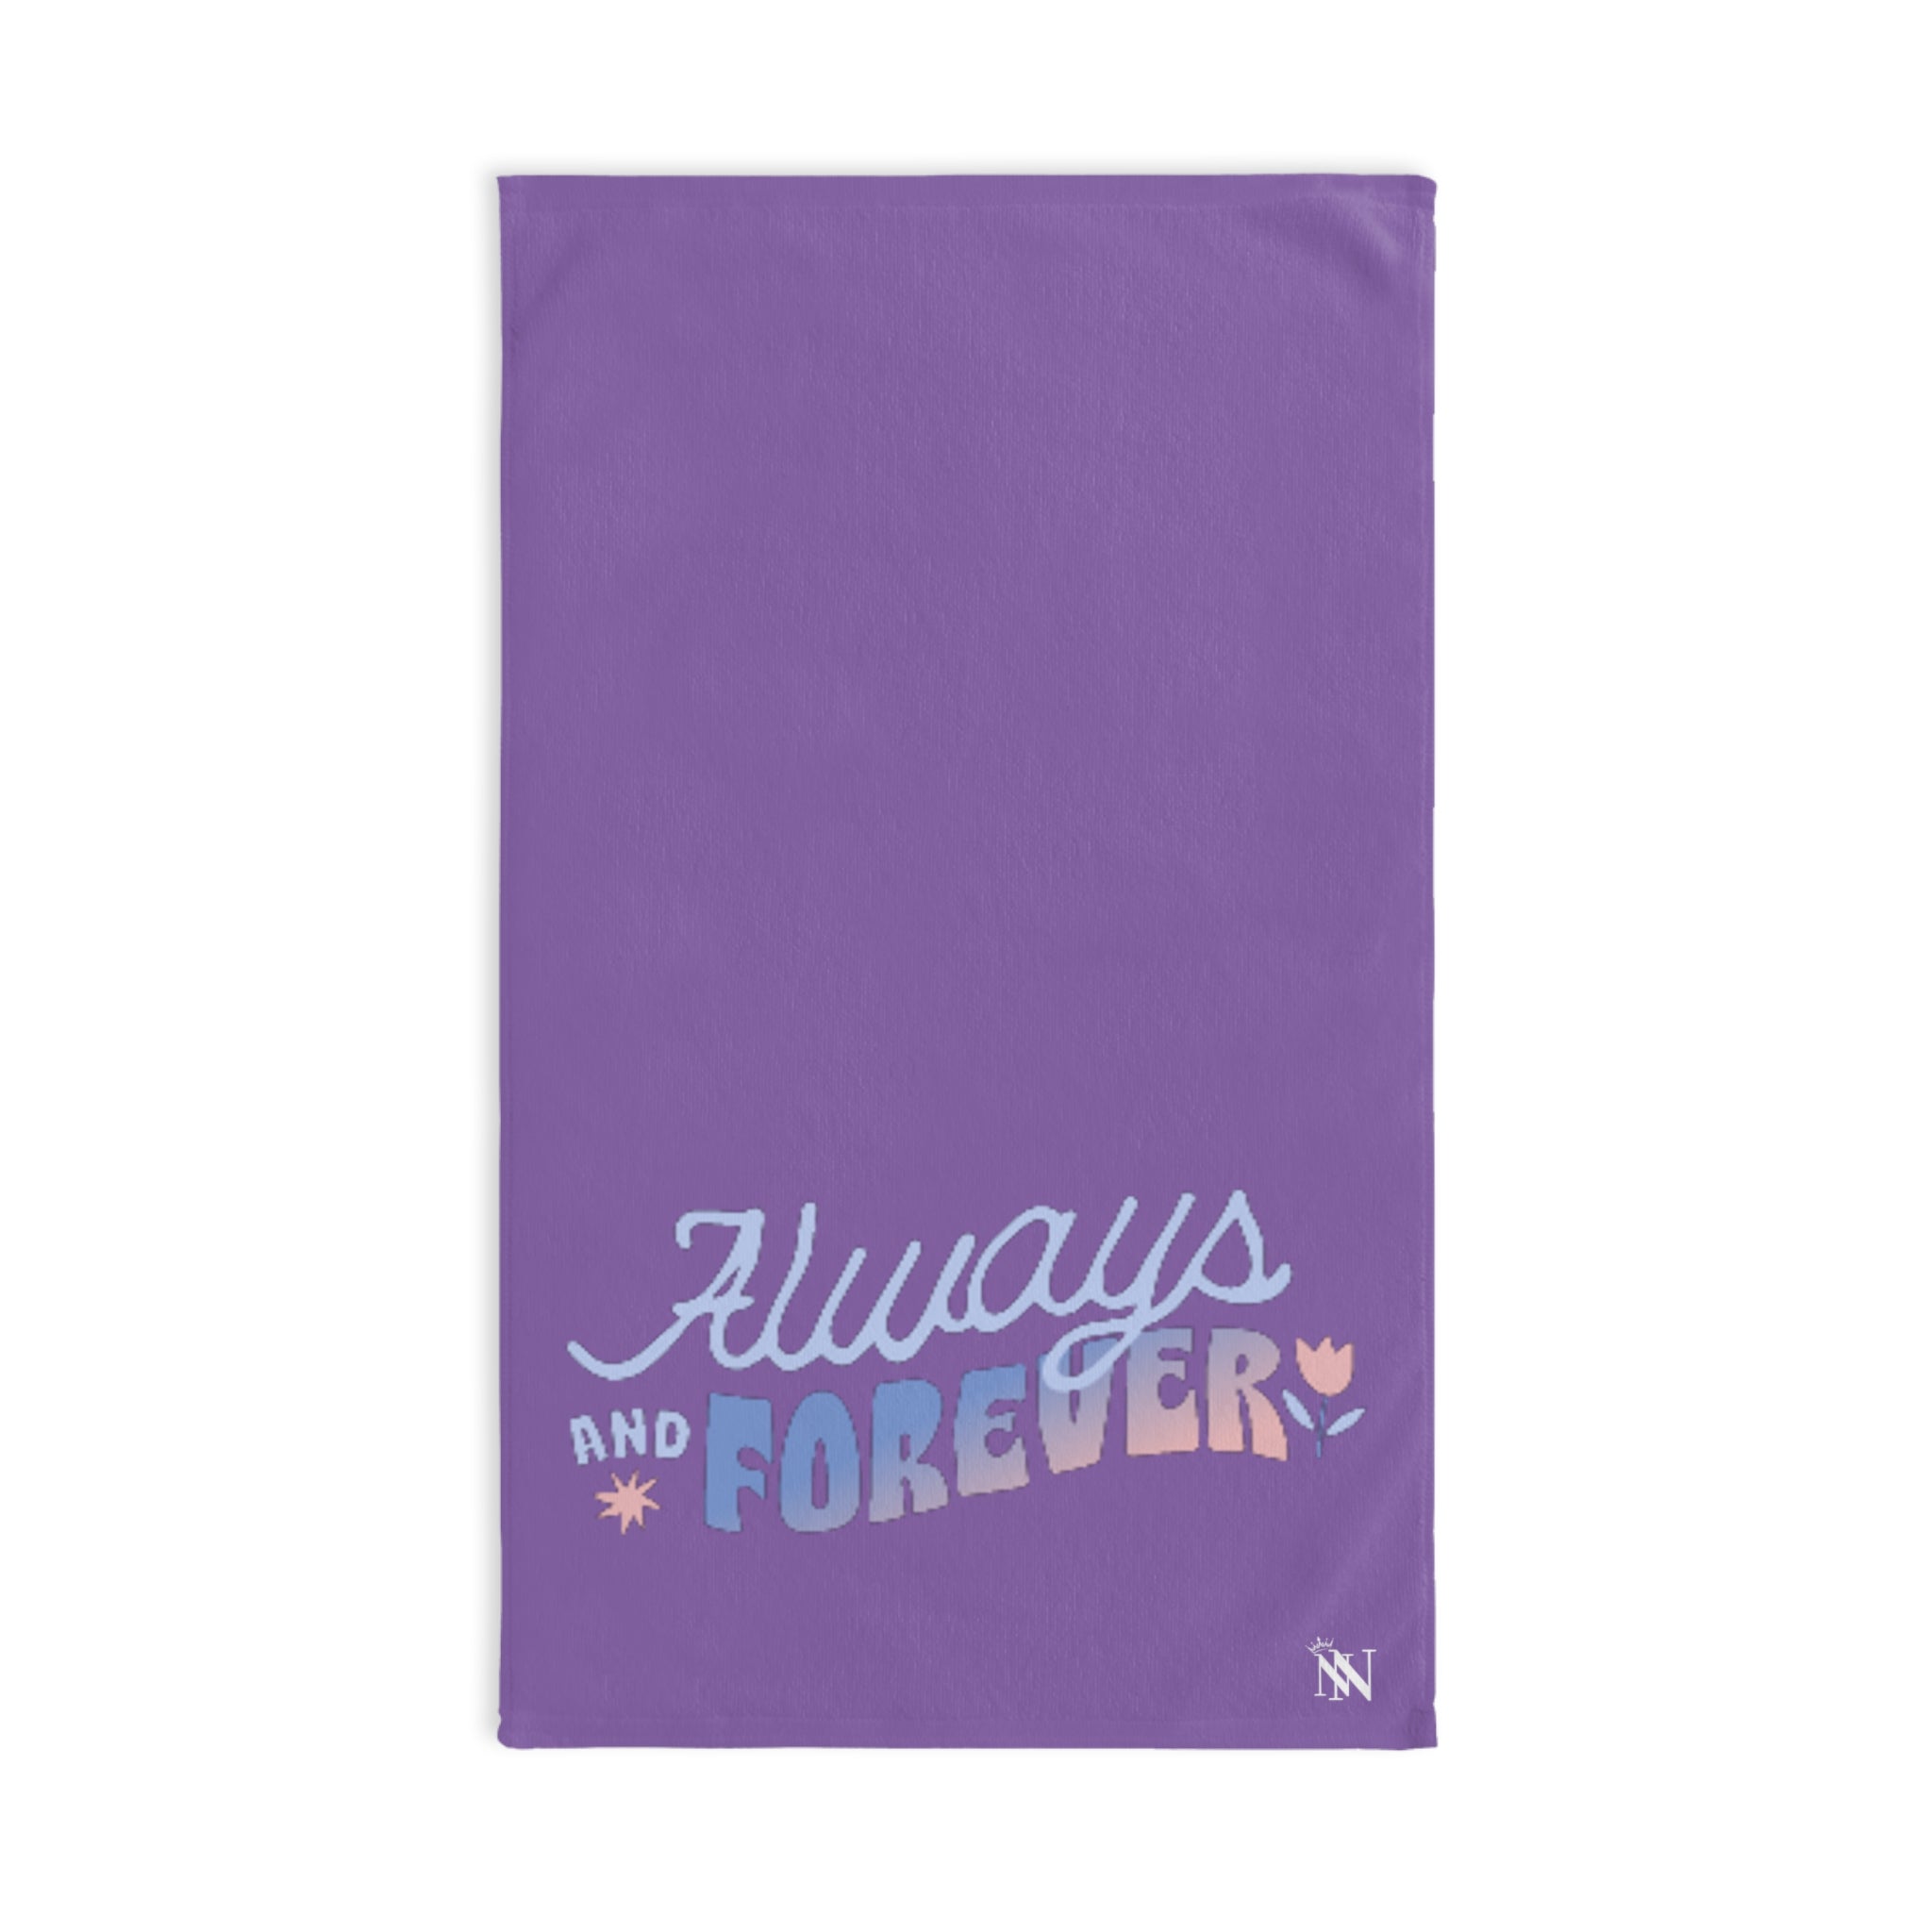 Always and Forever Lavendar | Funny Gifts for Men - Gifts for Him - Birthday Gifts for Men, Him, Husband, Boyfriend, New Couple Gifts, Fathers & Valentines Day Gifts, Hand Towels NECTAR NAPKINS